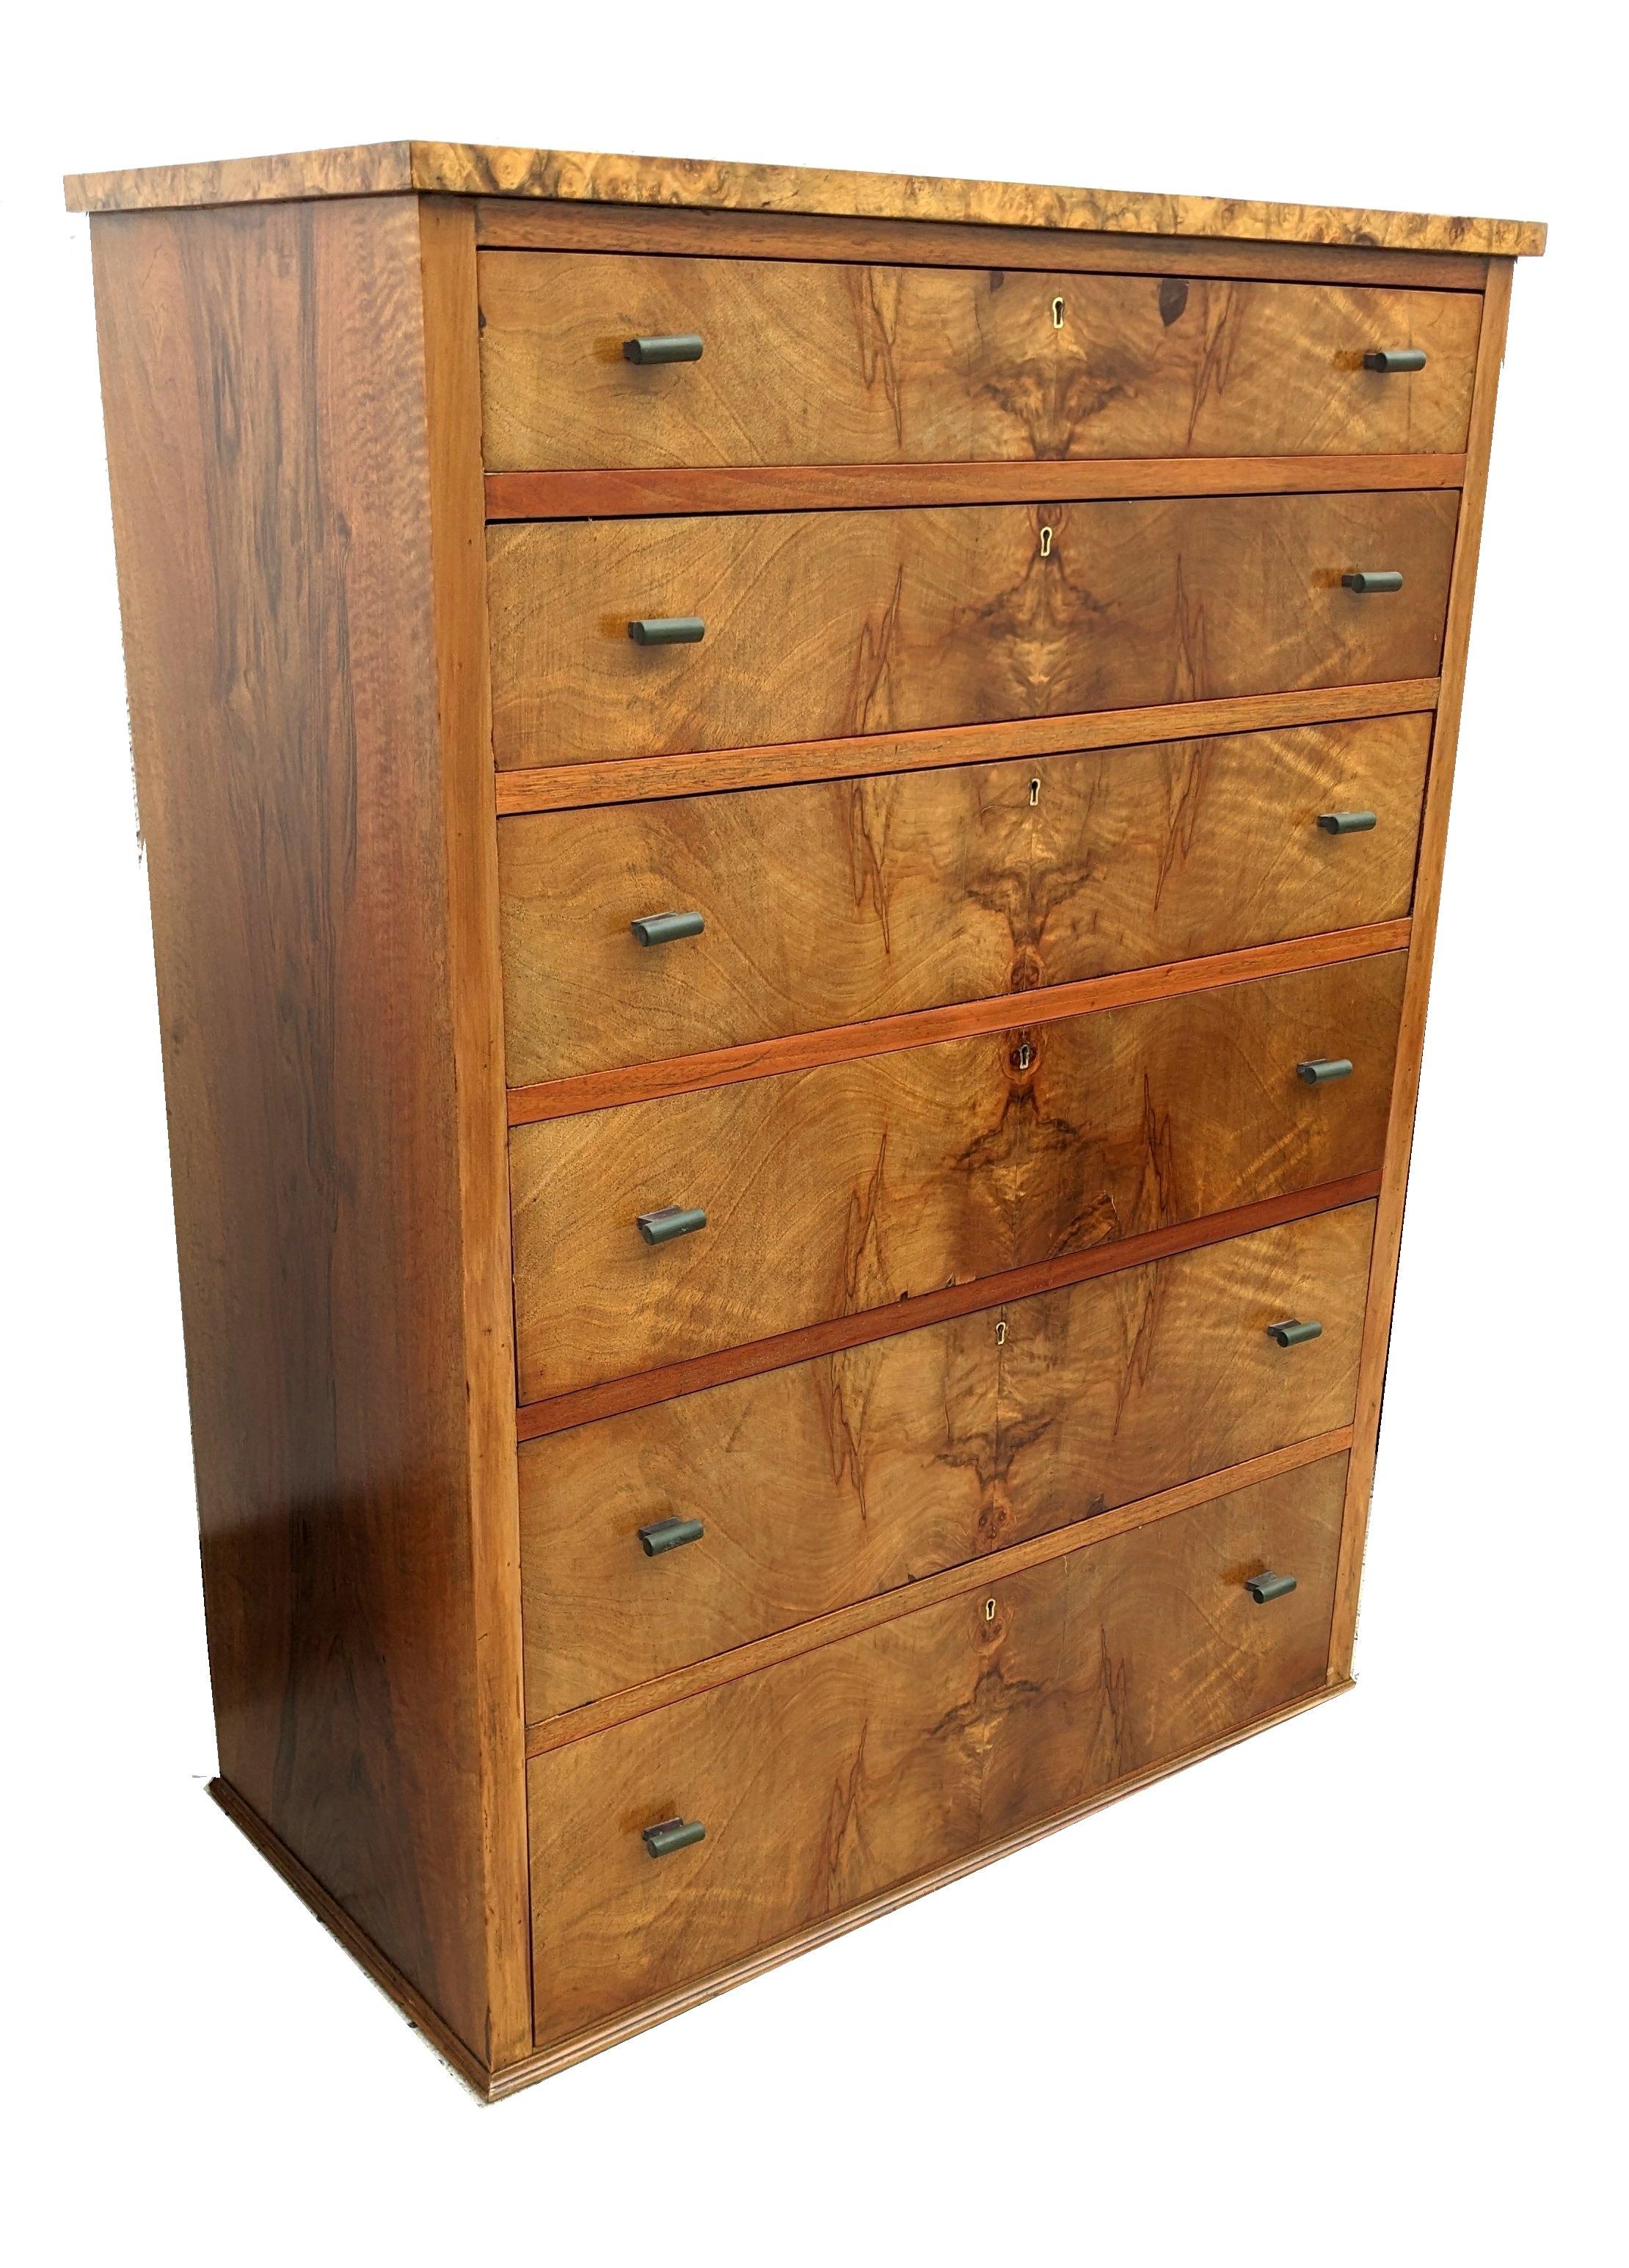 For your consideration is this very stylish and beautifully figured Walnut original Art Deco chest of drawers which dates to the 1930's. Six graduated generously sized drawers which are veneered in a warm mid tone figured walnut veneer with original